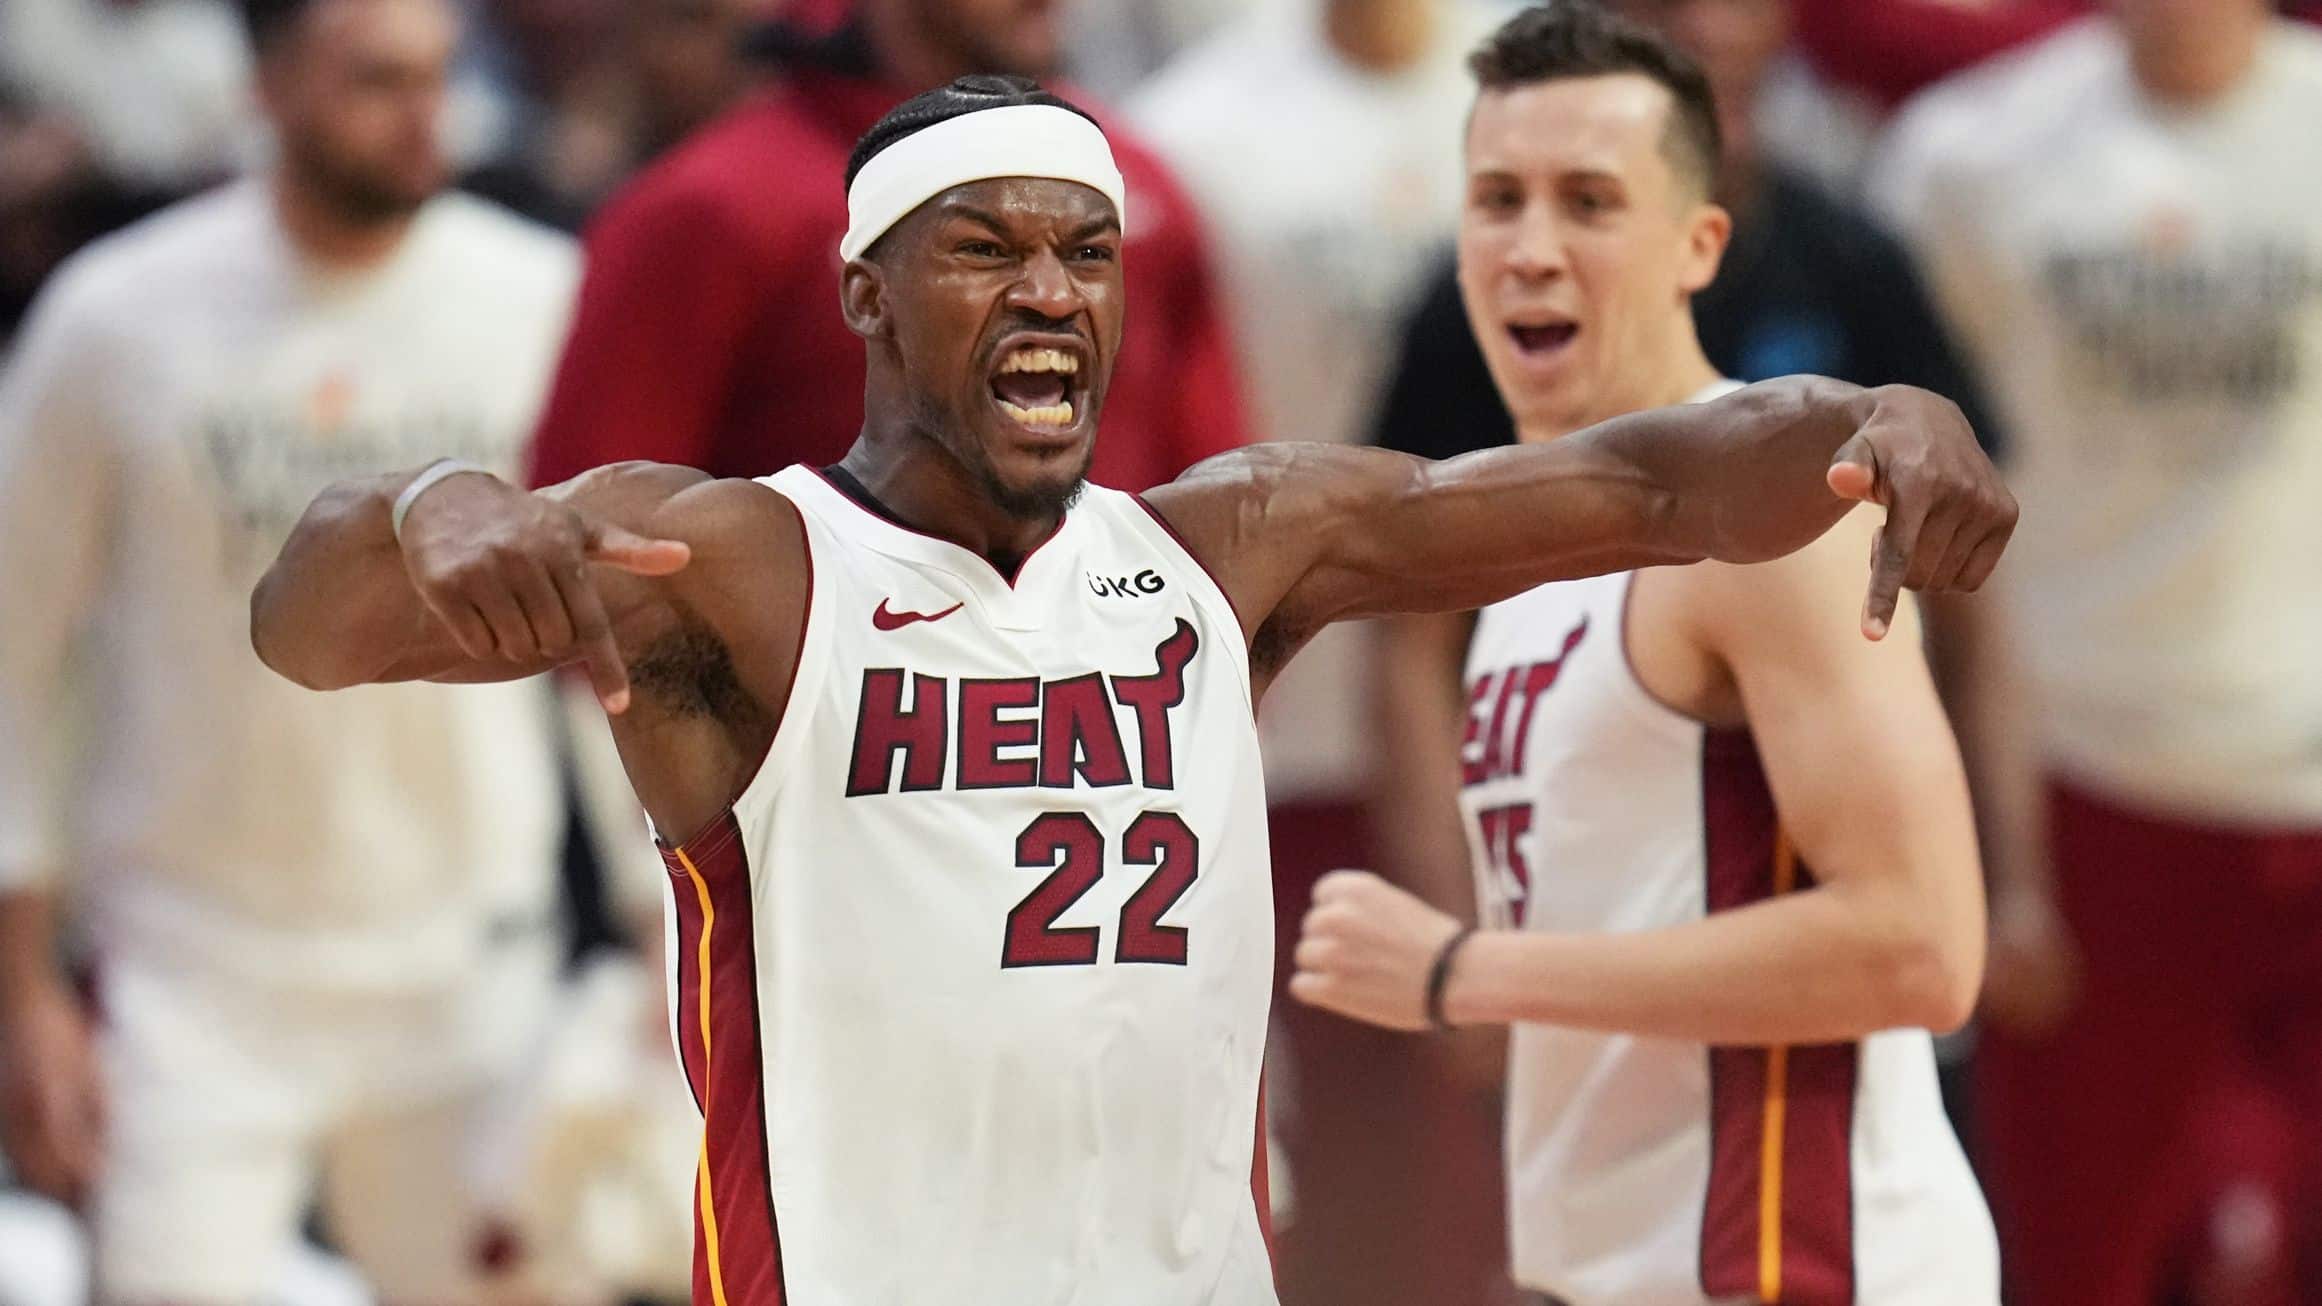 The Heat Are The Biggest Underdogs In NBA History - If They Win This Championship